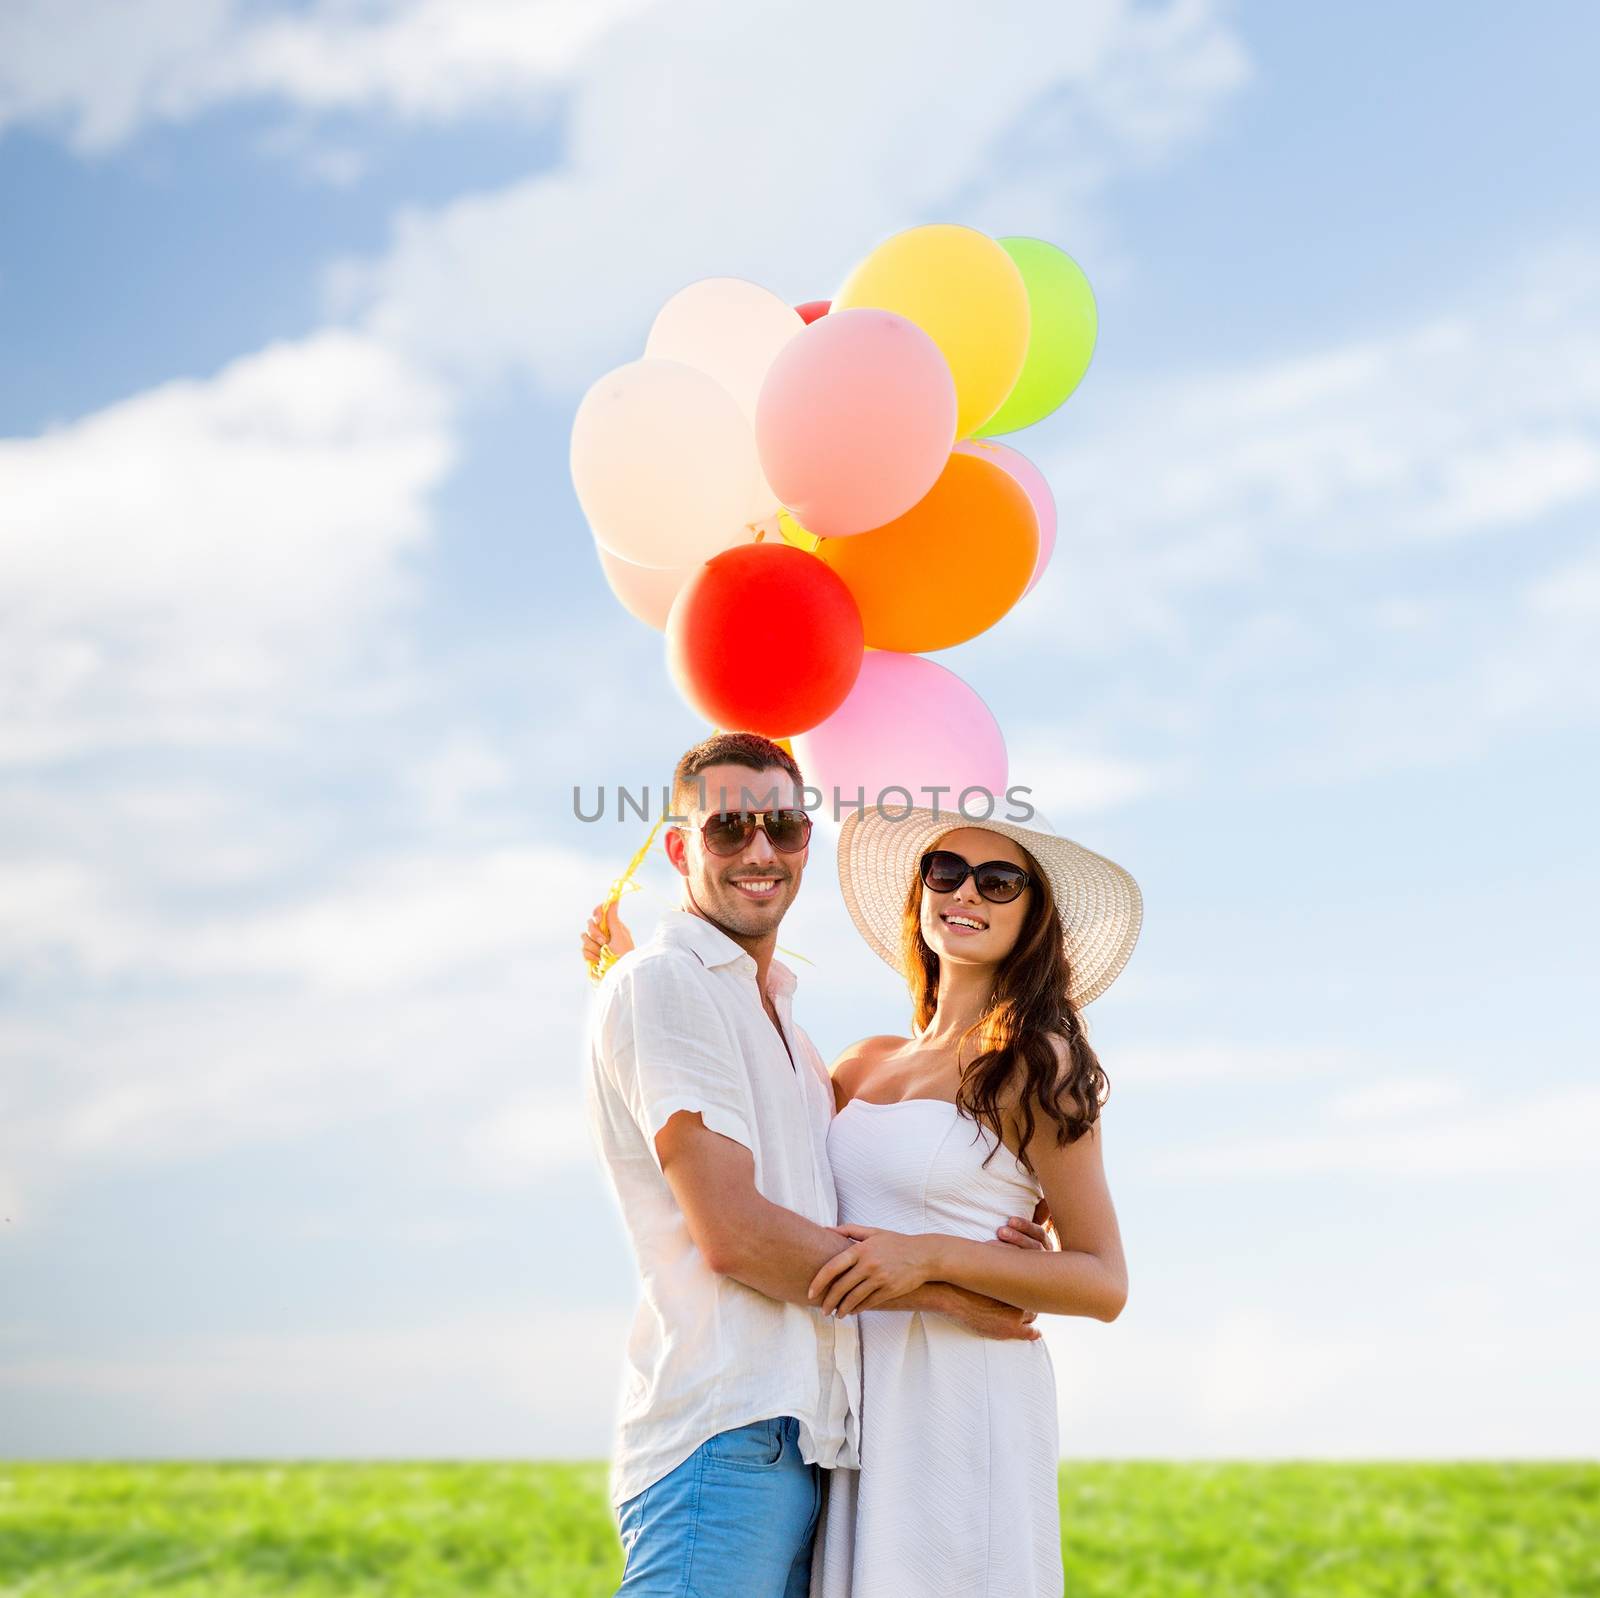 love, wedding, summer, dating and people concept - smiling couple wearing sunglasses with balloons hugging over blue sky and grass background